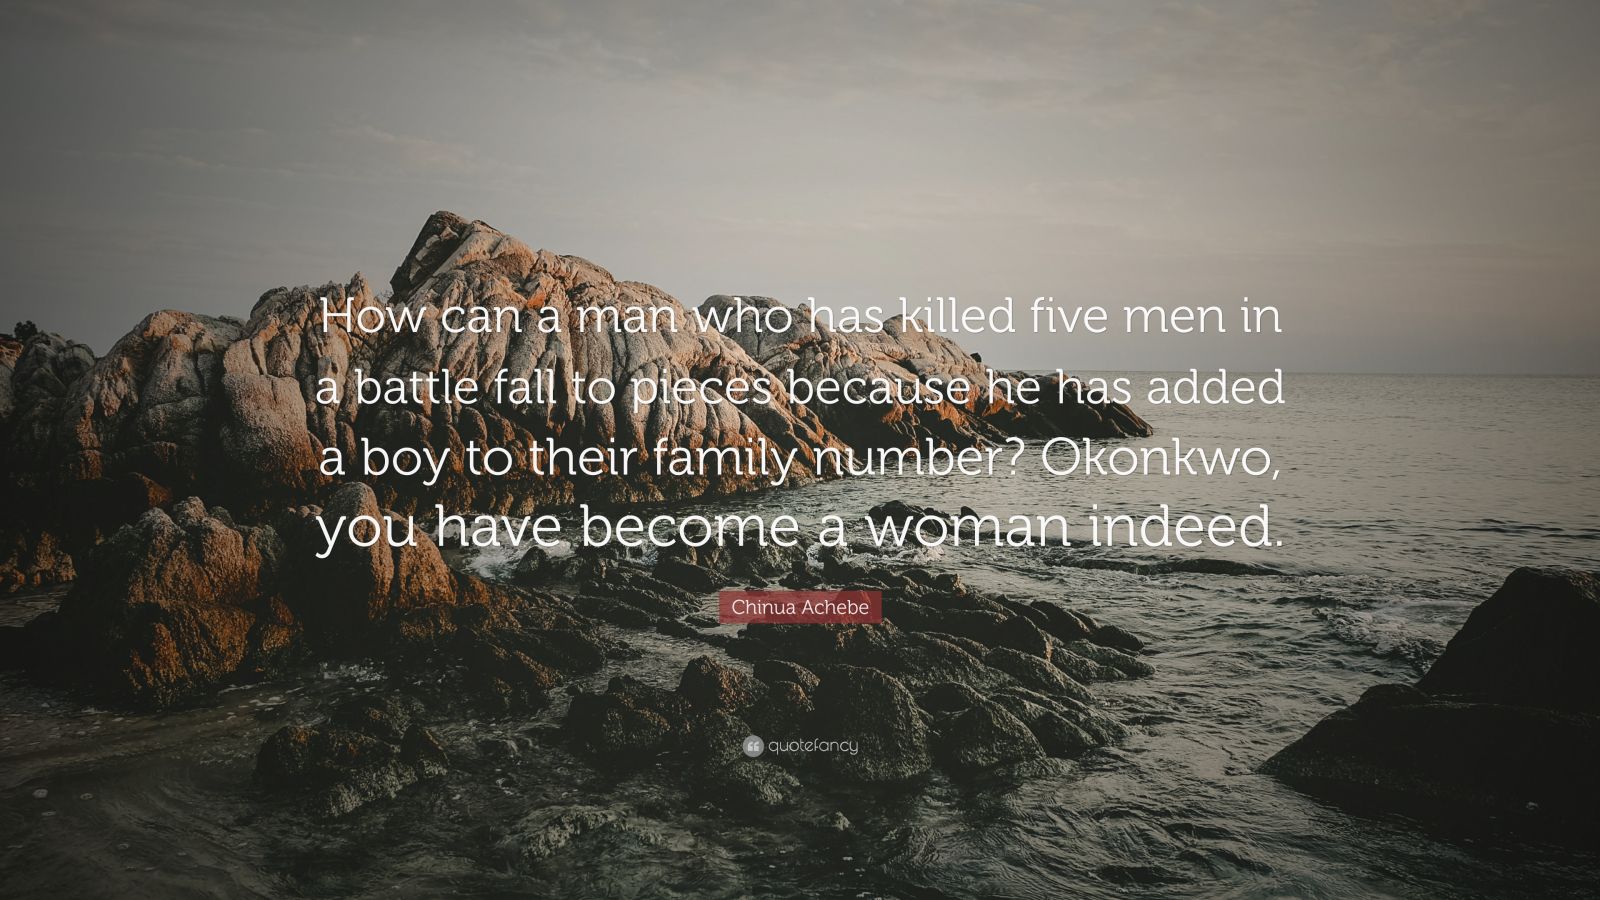 Chinua Achebe Quote: “How can a man who has killed five men in a battle ...